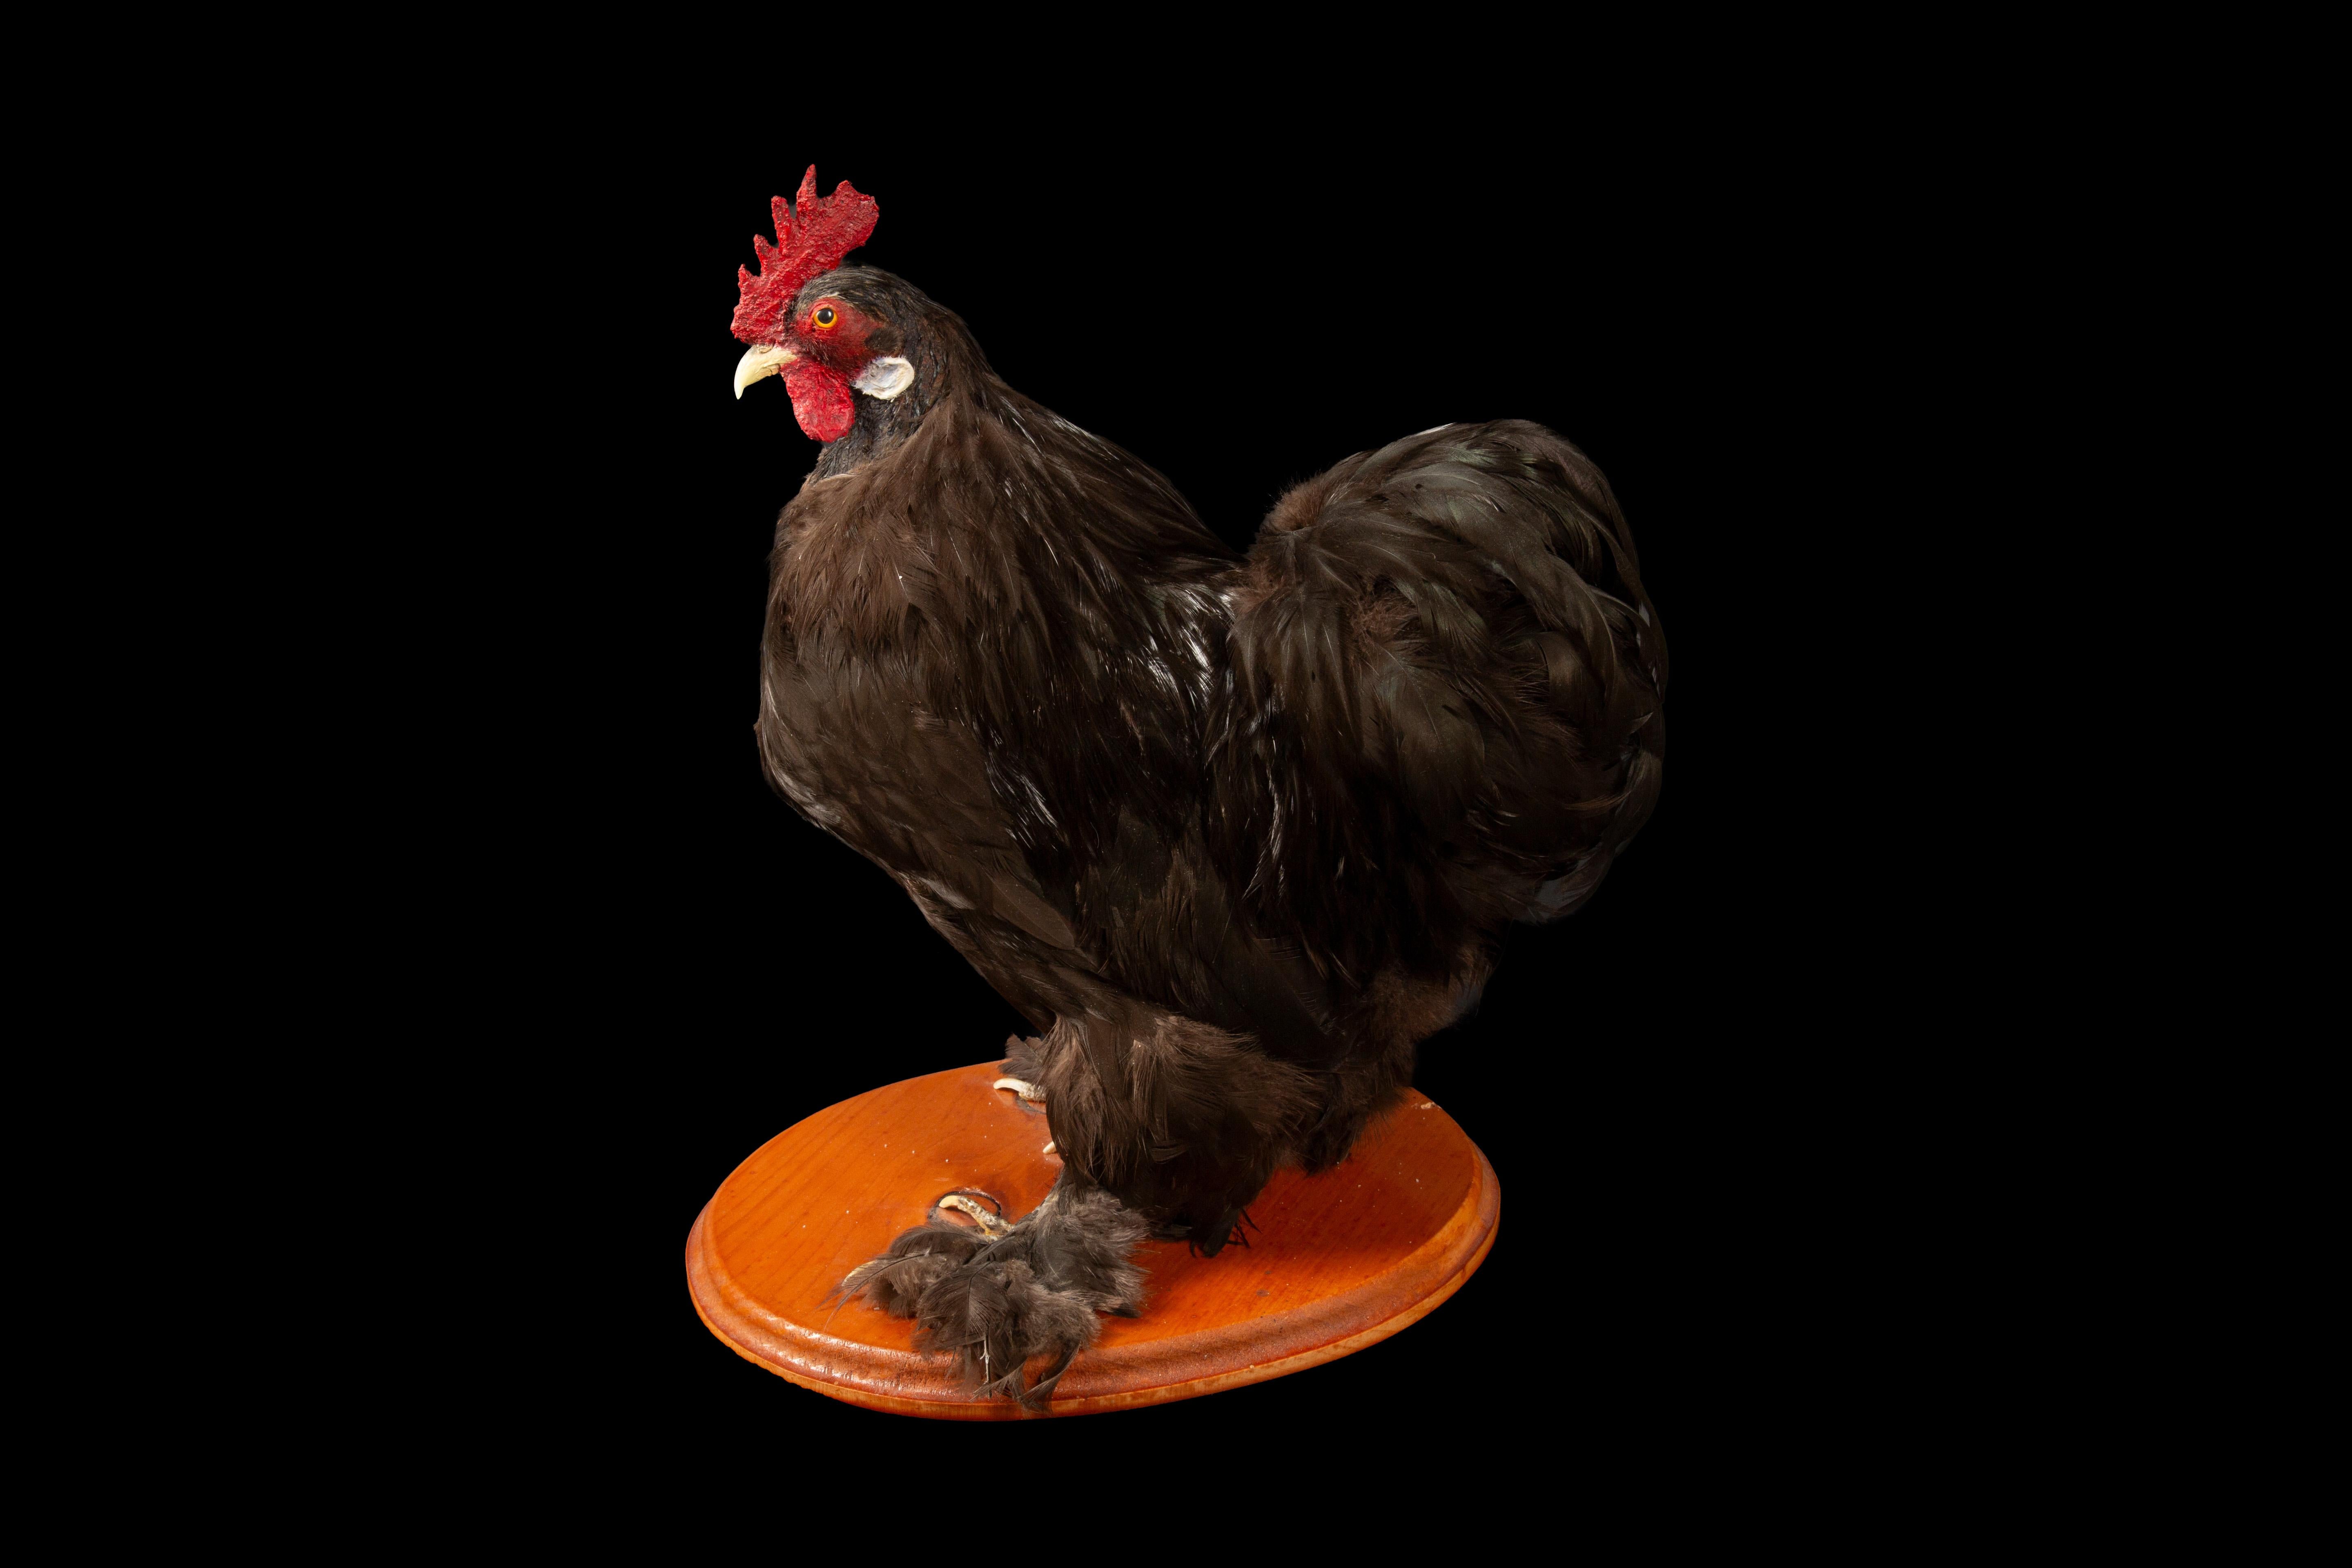 Exquisite Taxidermy Black Hairy Clawed Cochin Chicken, a stunning representation of the Cochin breed, which boasts a rich history dating back to the 1840s and 1850s when large feather-legged chickens were introduced from China to Europe and North